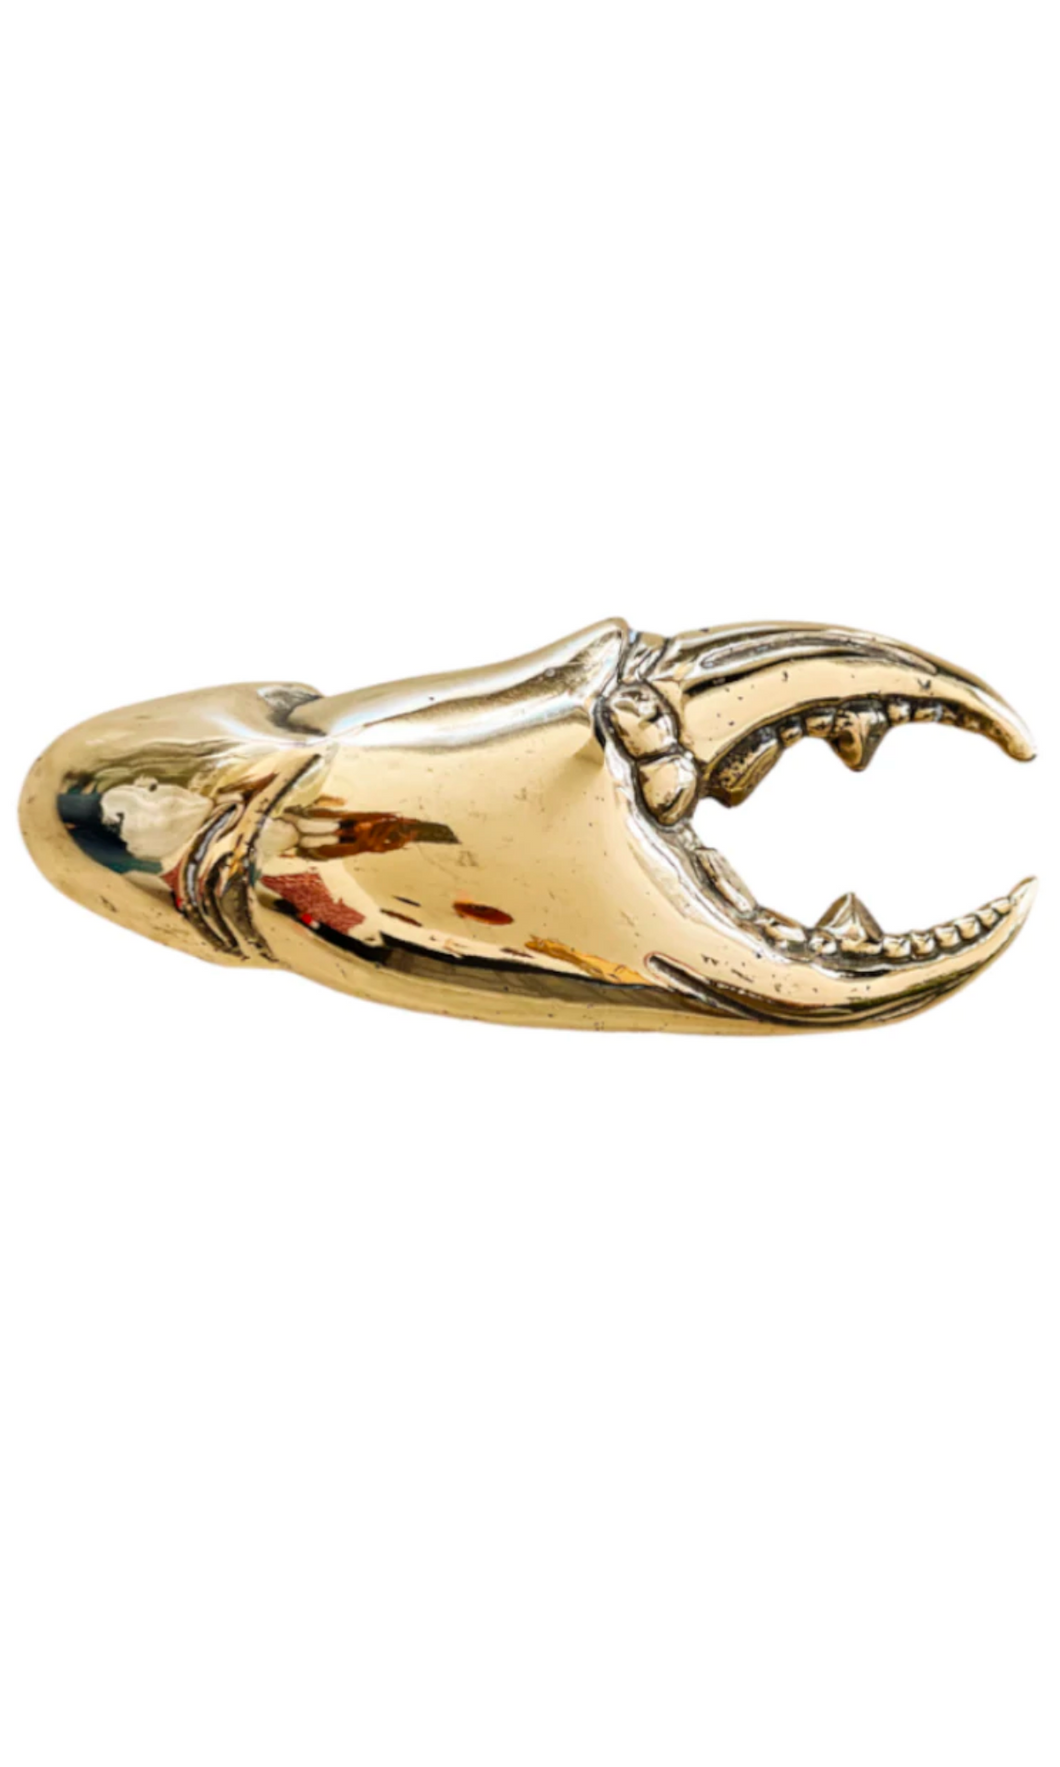 MR PINCHY & CO | Crab Claw Bottle Opener